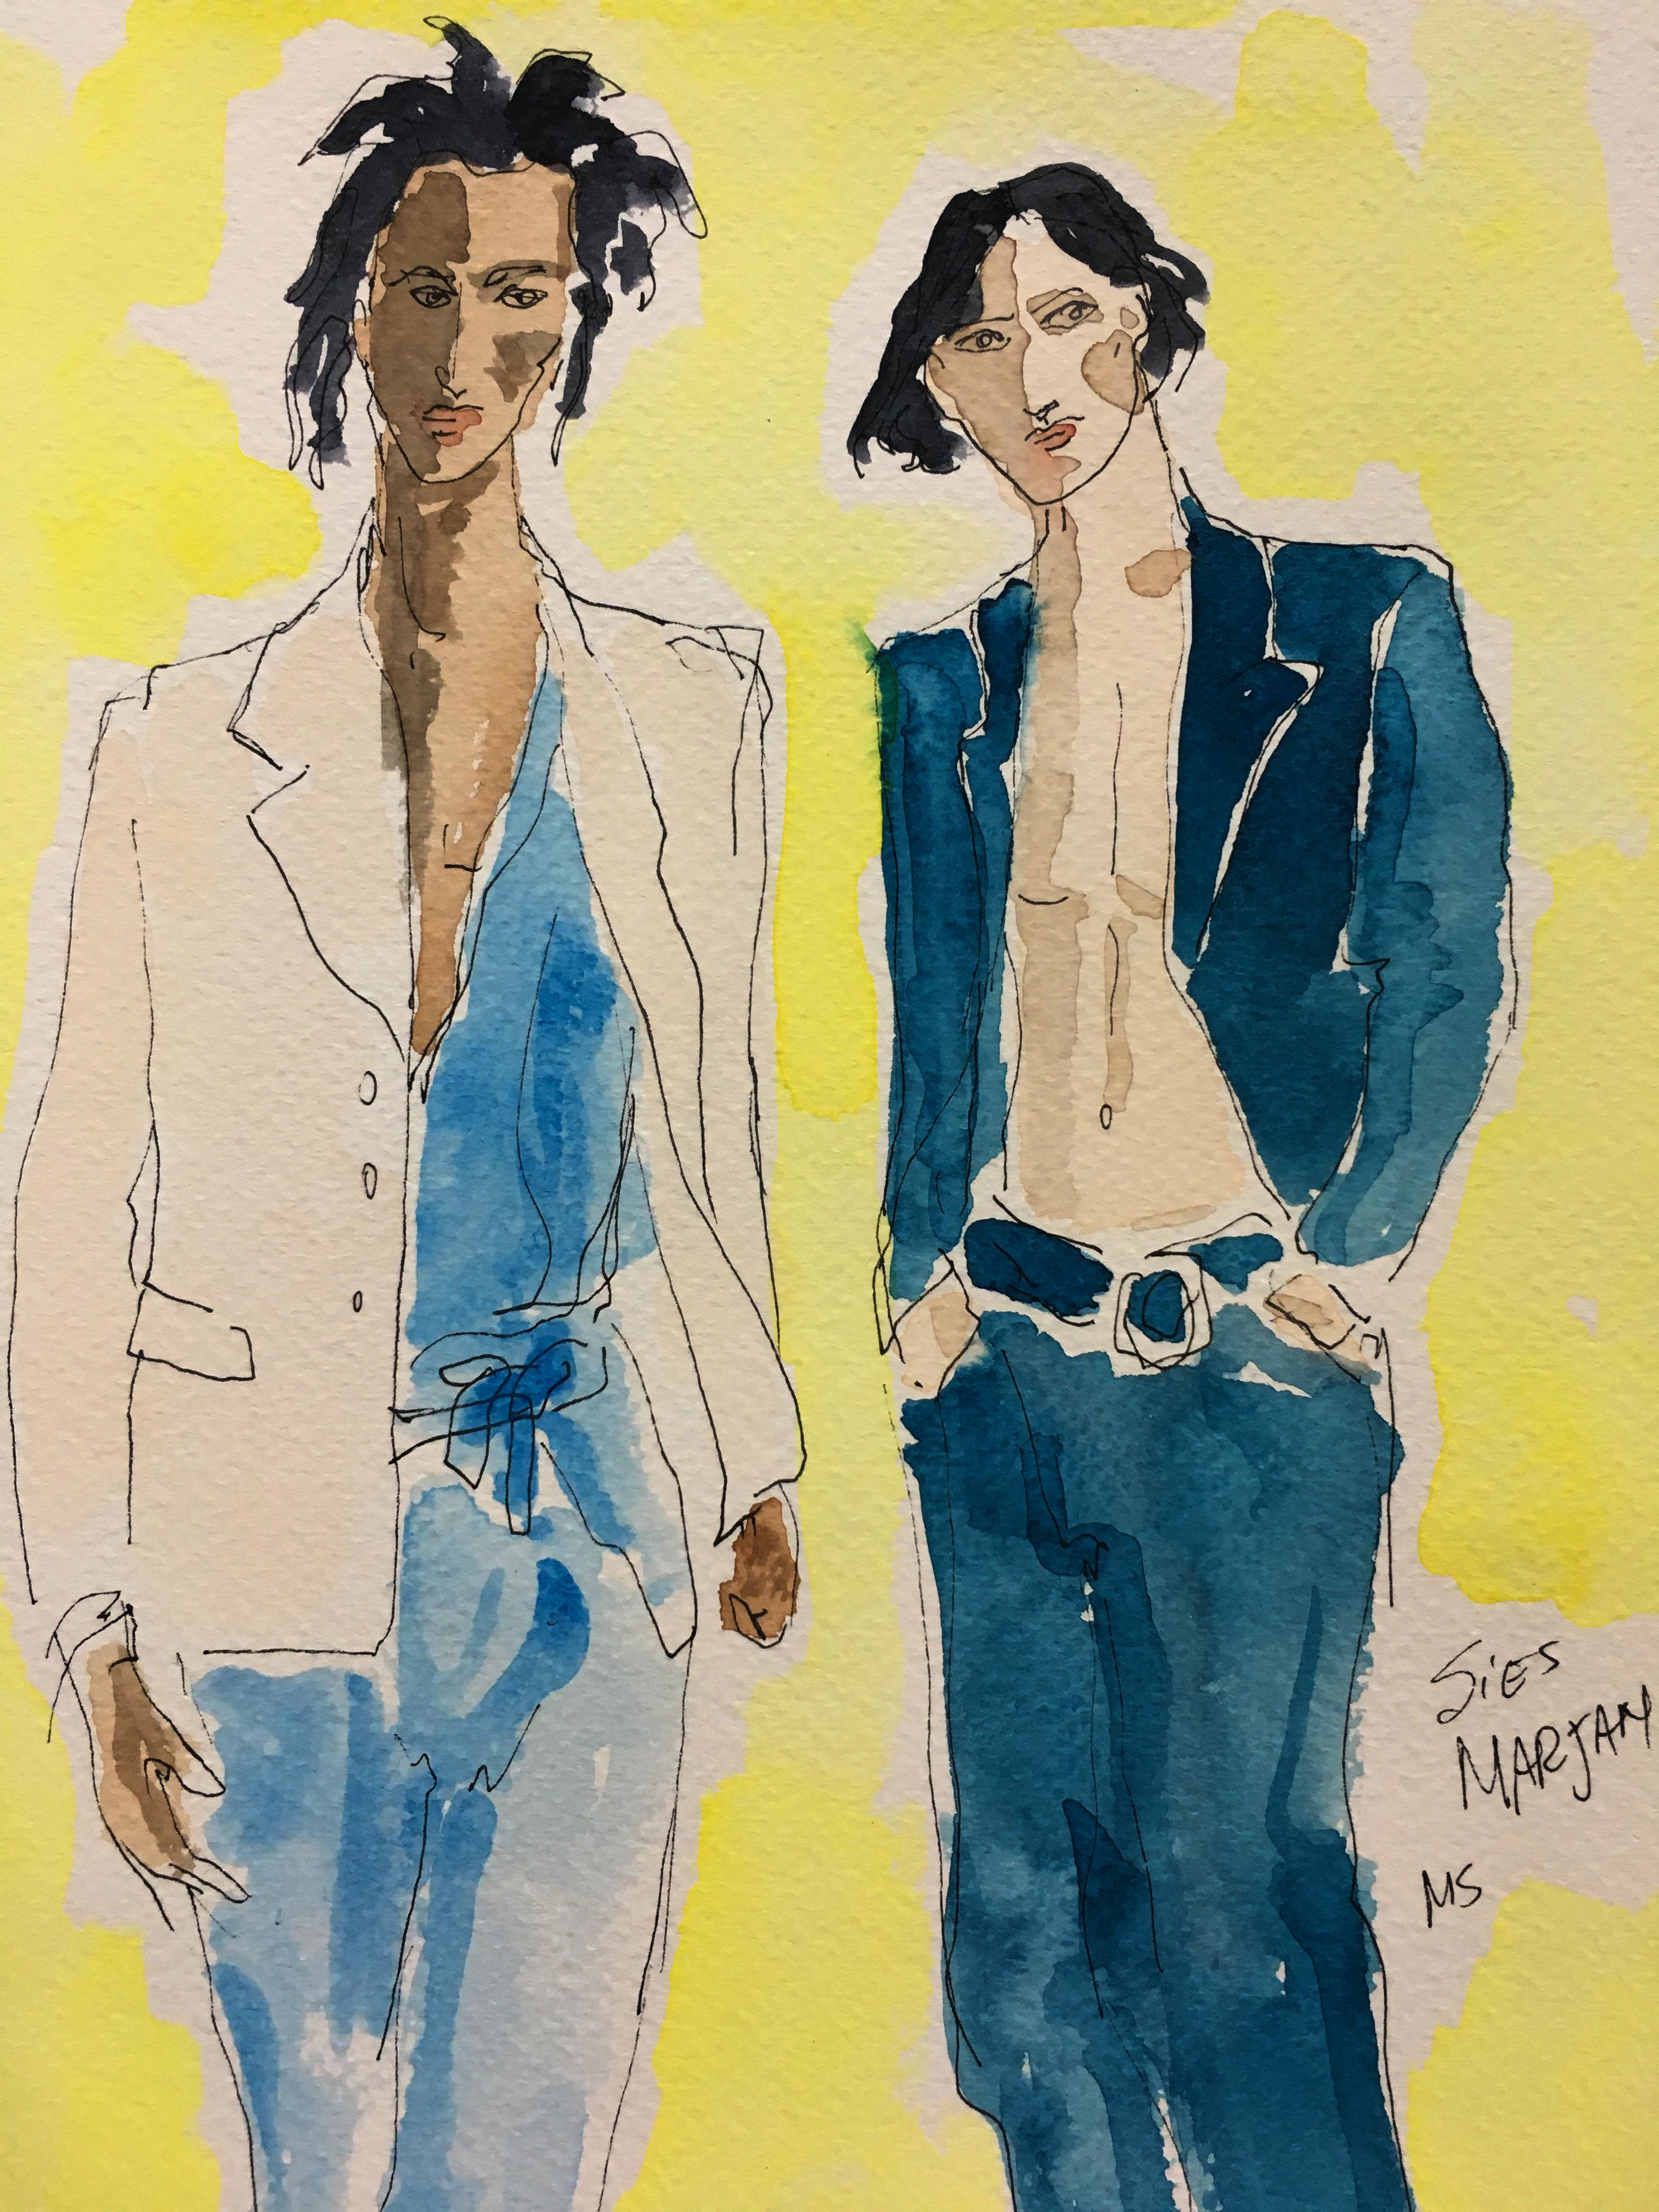 Sies Marjan, Fashio show models 2021 Ink pen and watercolor - Contemporary Art by Manuel Santelices